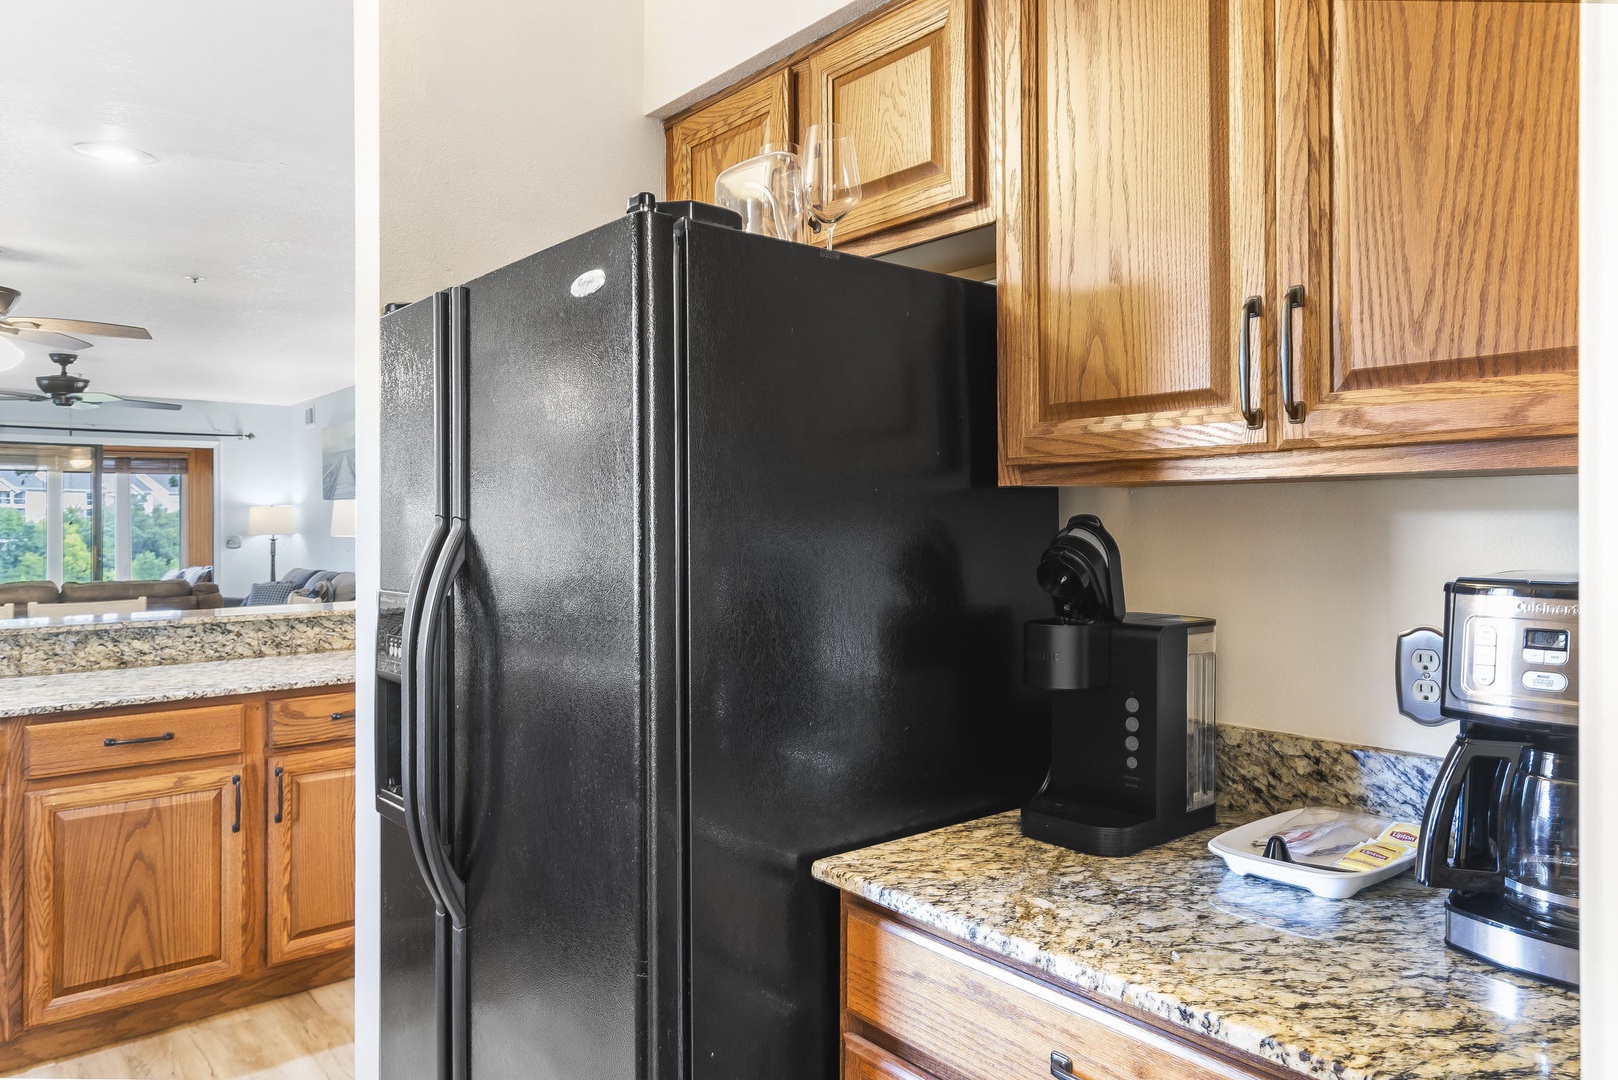 The kitchen offers ample counter space & all the comforts of home